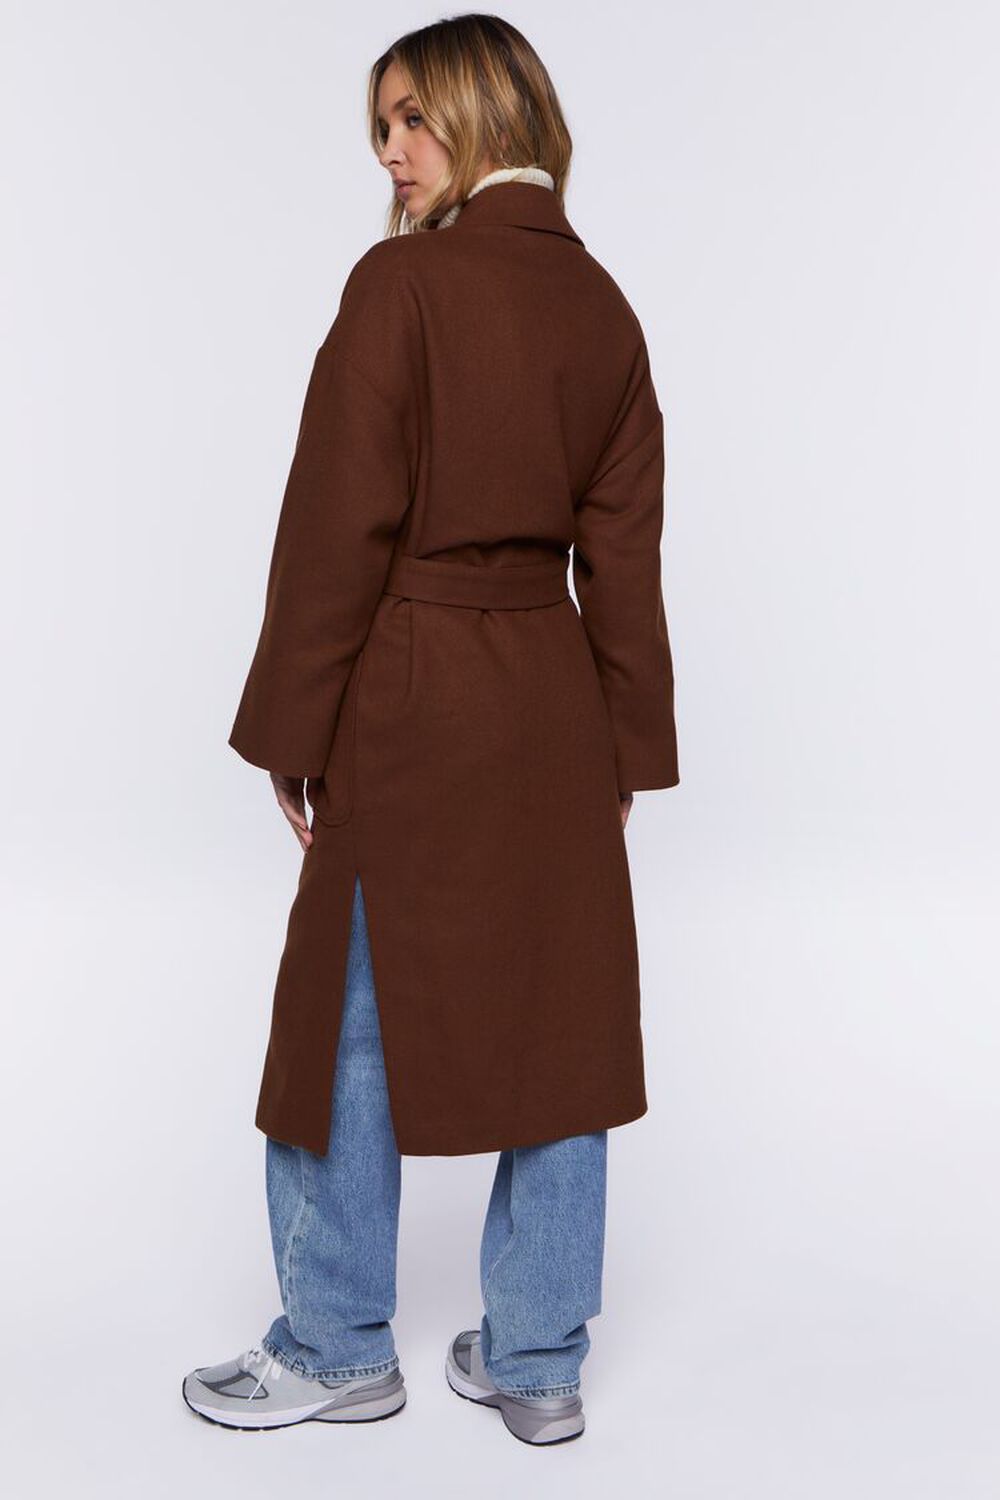 Belted Canvas Duster Coat, image 3